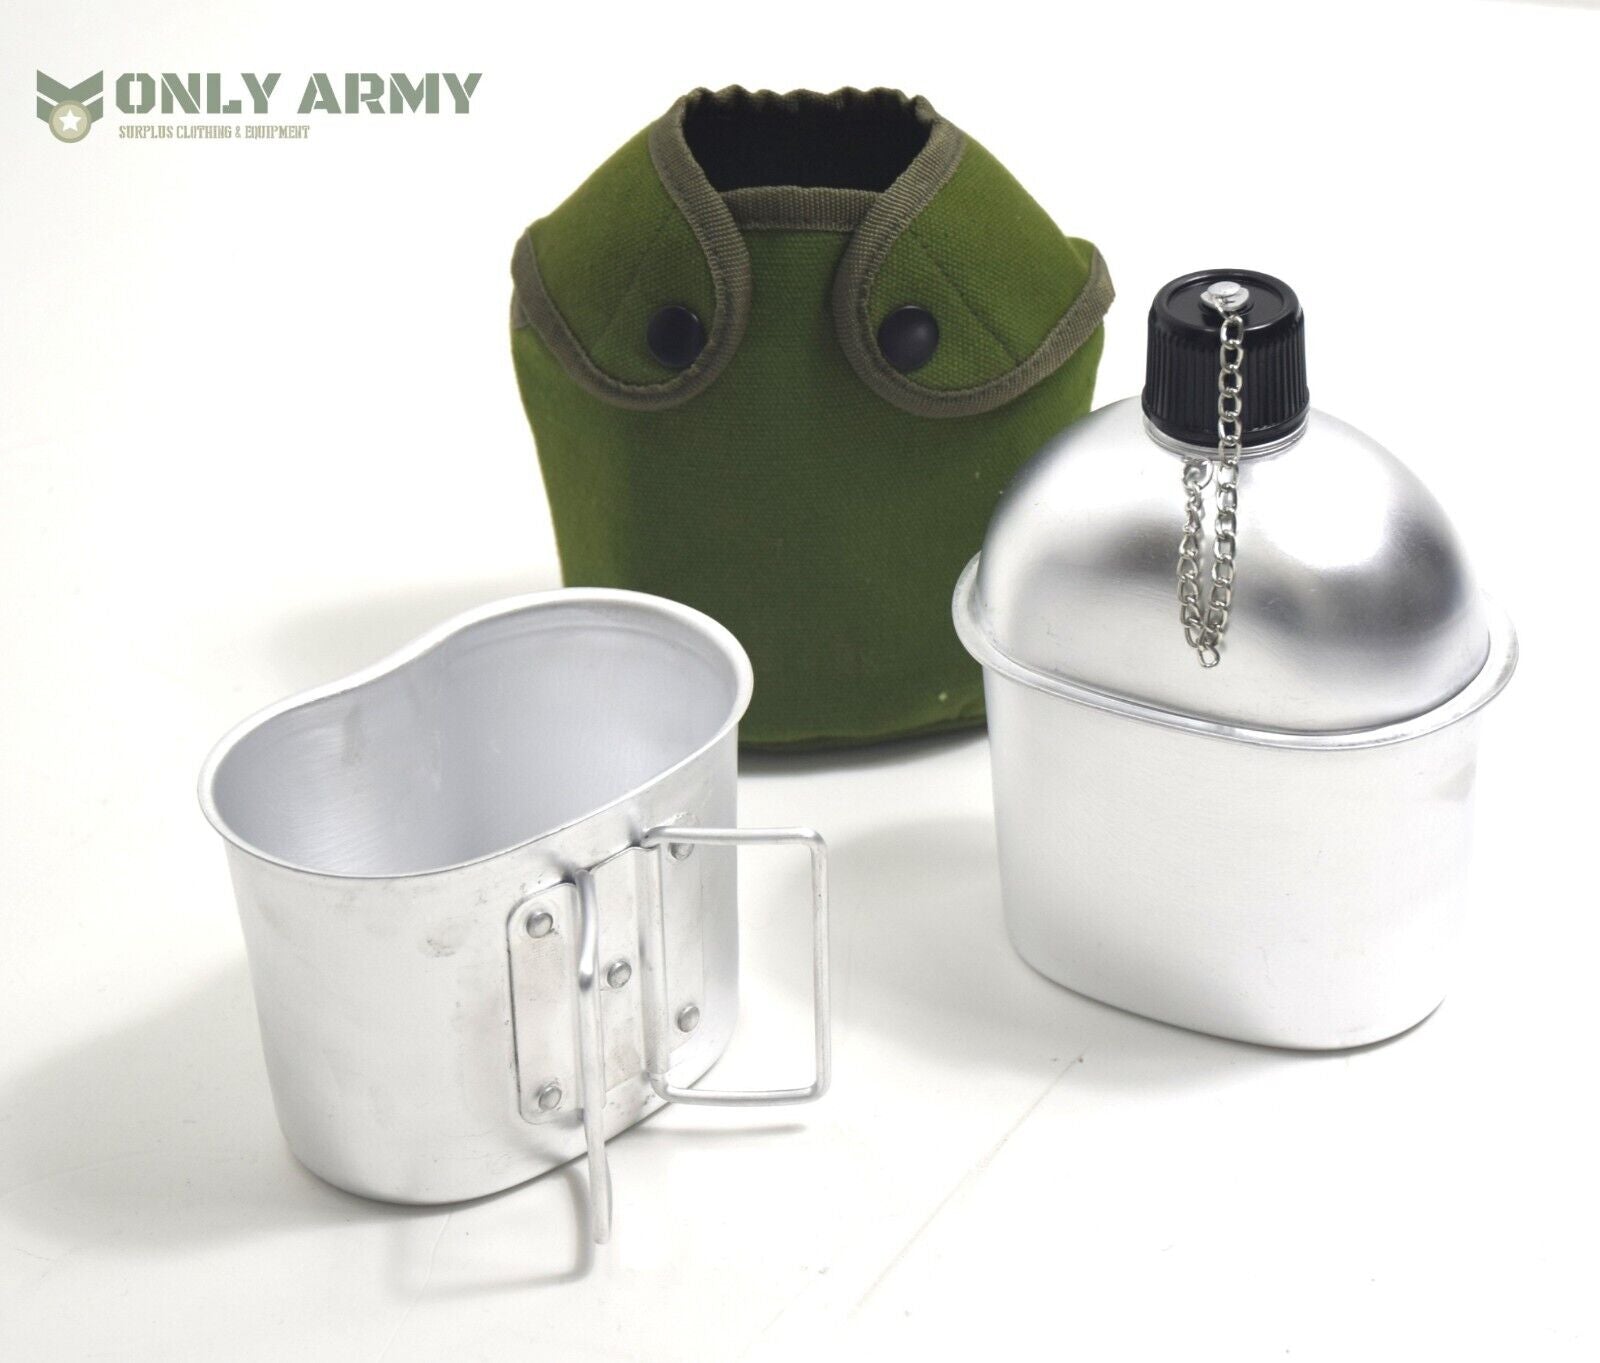 Army / Military Style Metal Water Bottle + Cup + Pouch Set Canteen Bottle Mug